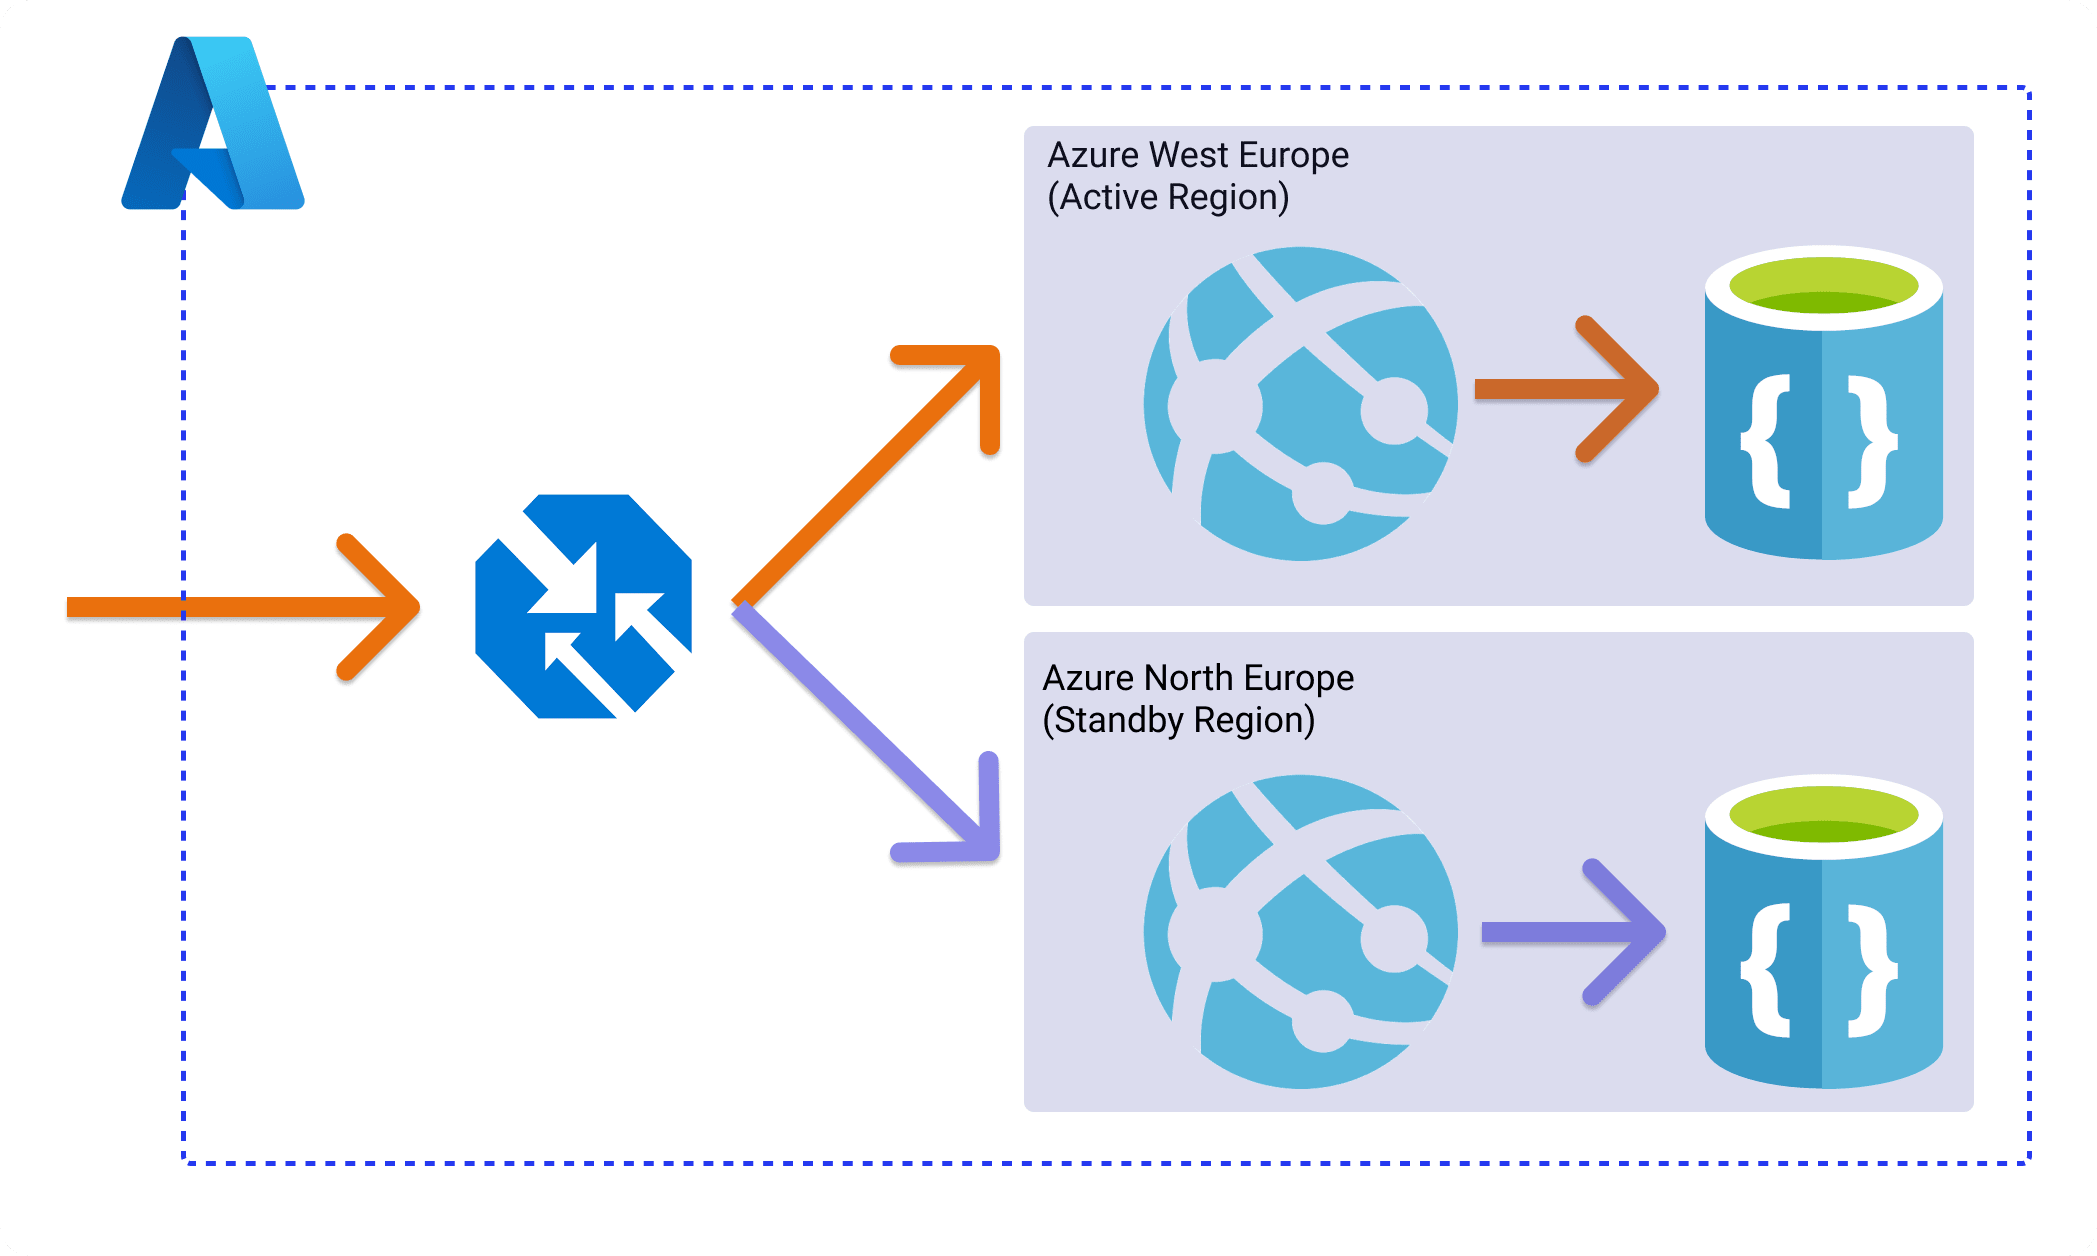 Beginners guide to building high availability systems in Azure - Part 1: Availability Concepts